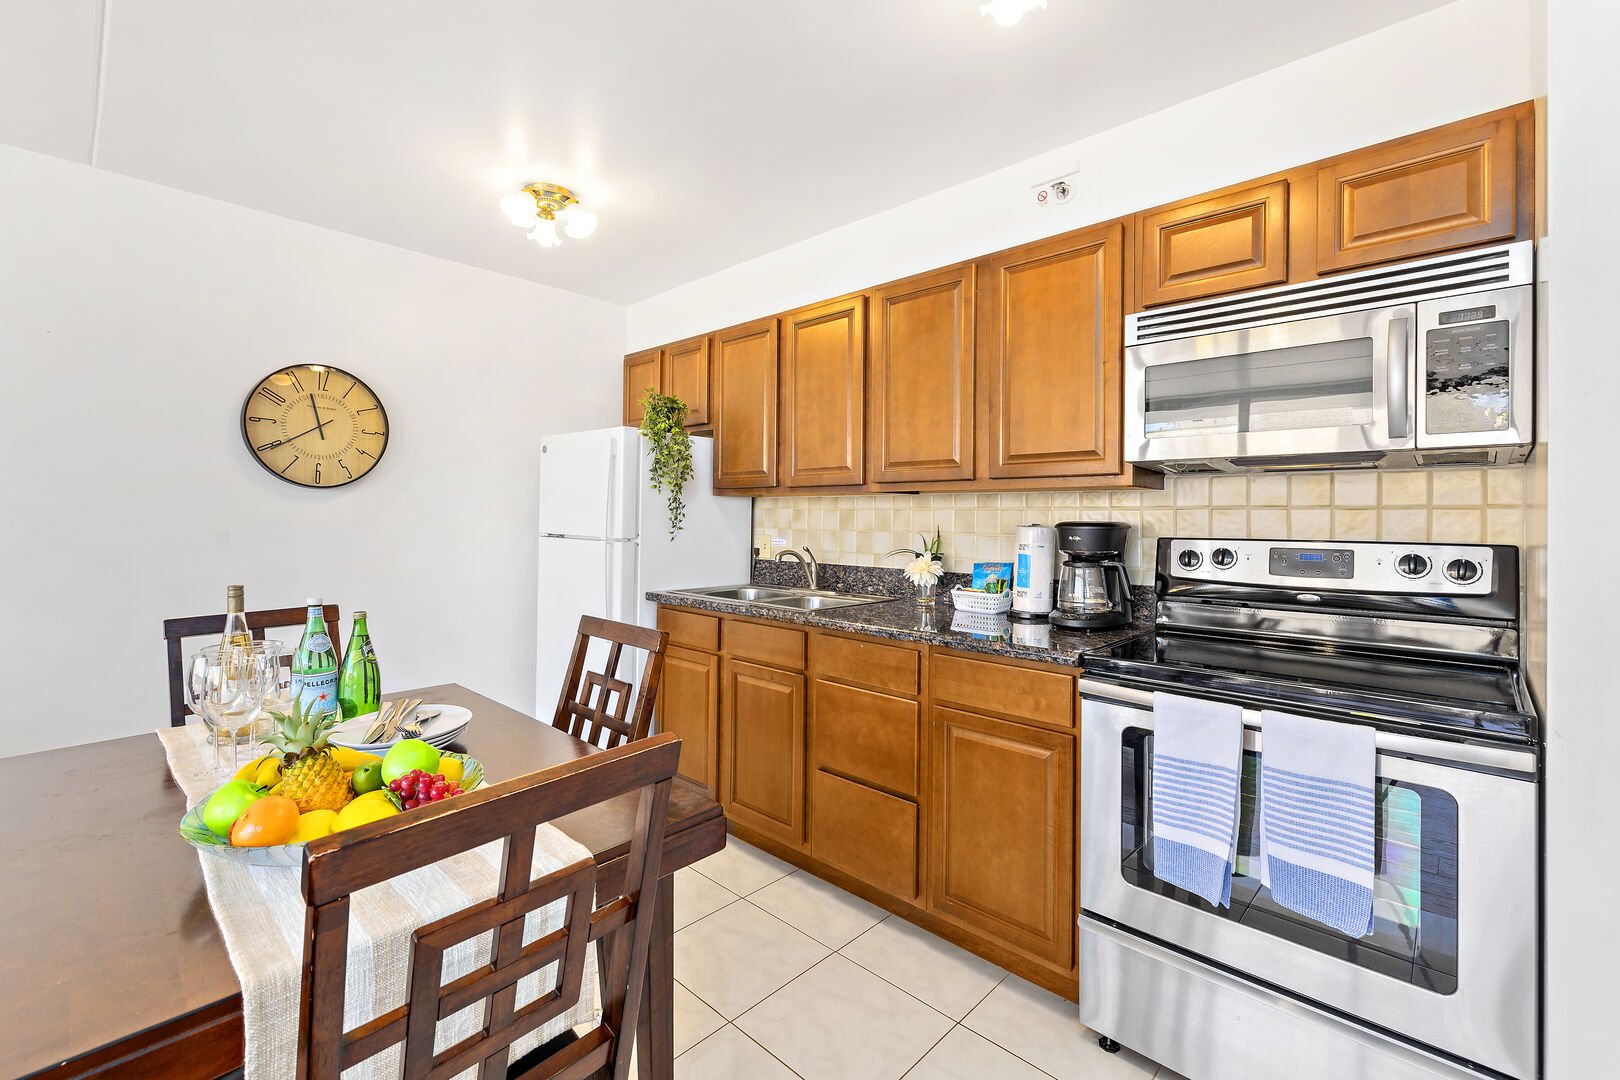 Fully equipped kitchen perfect for your culinary needs!